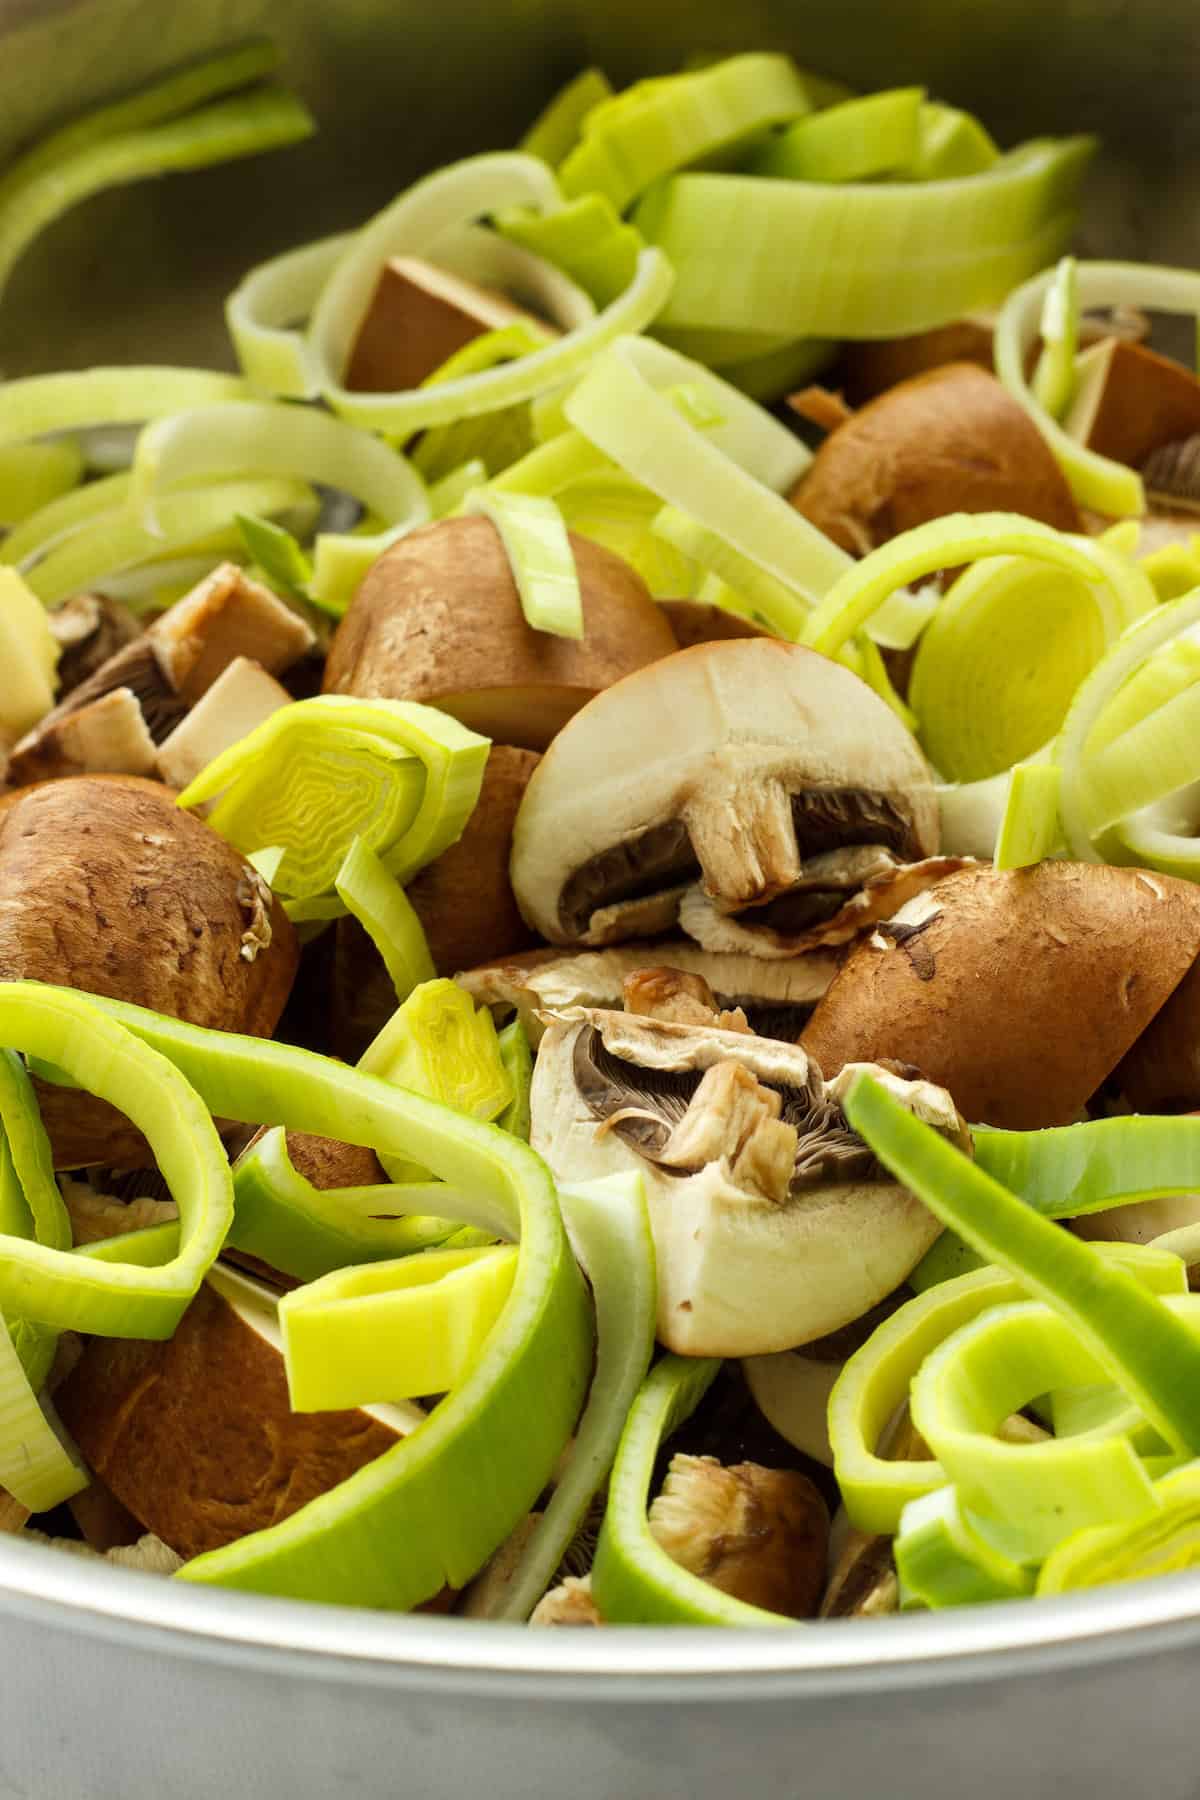 Sliced leeks and mushrooms cooking in a saute pan.